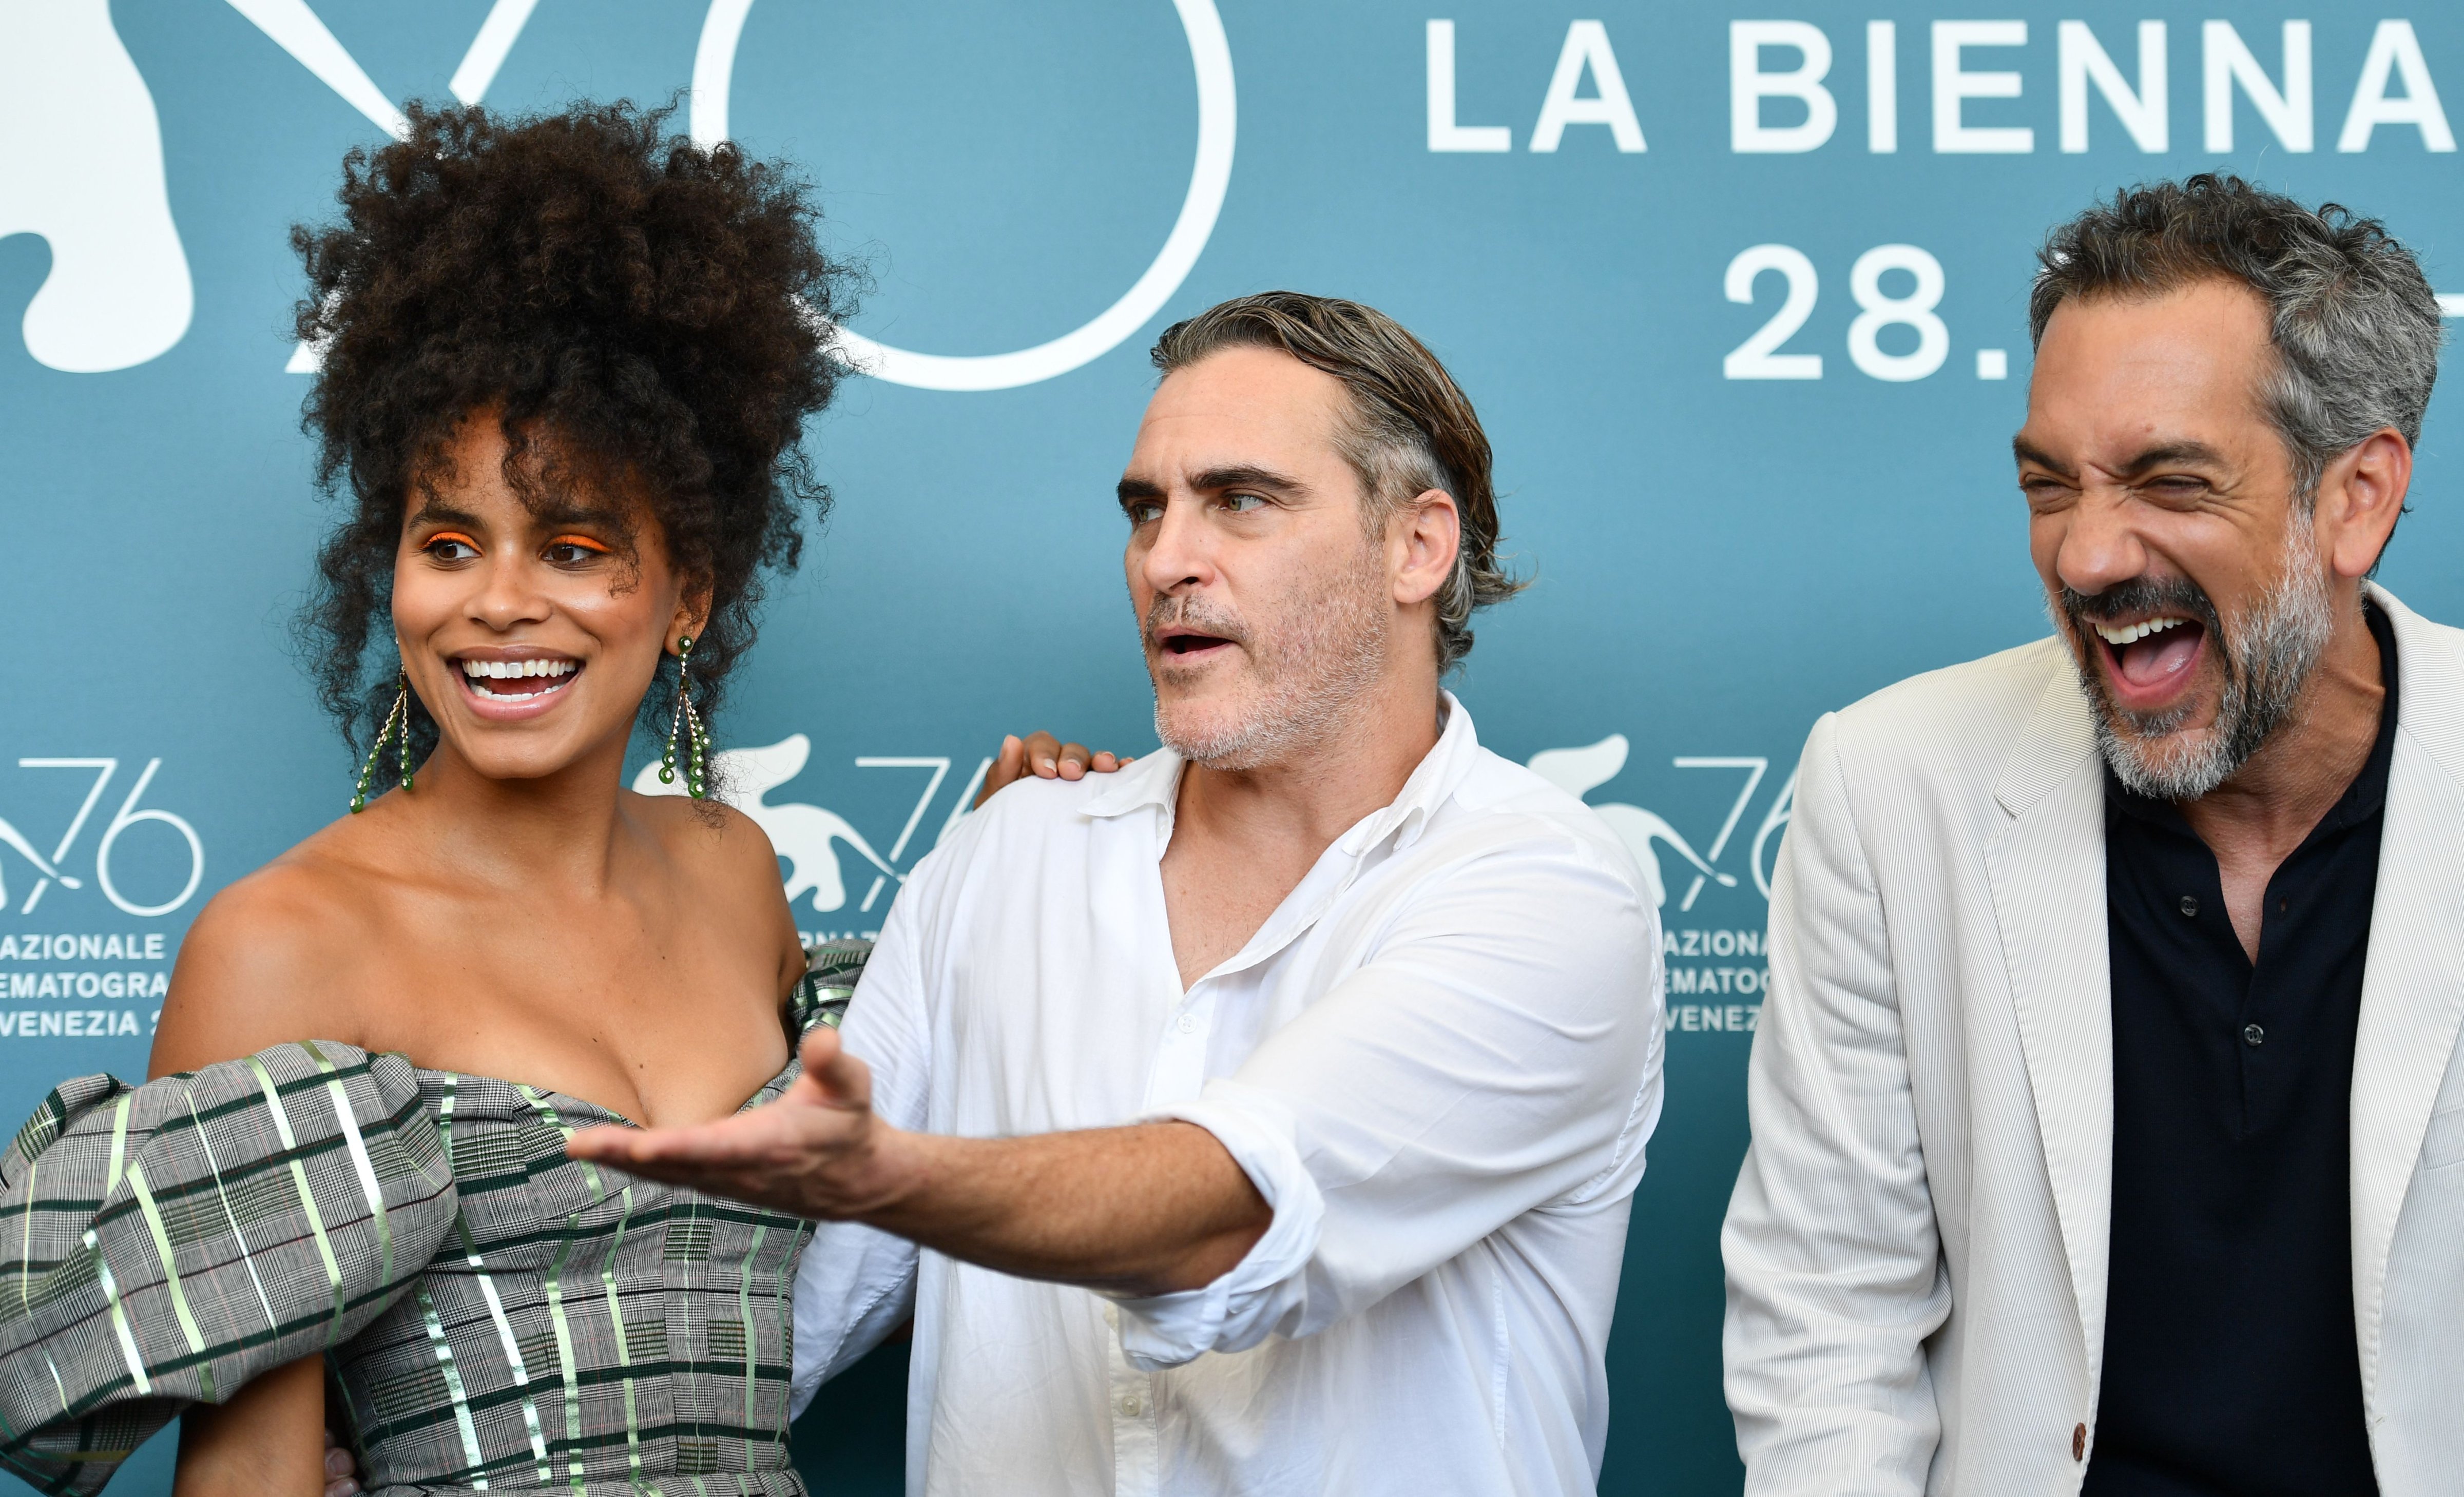 Zazie Beetz, Joaquin Phoenix and director Todd Phillips attend a photocall for the film "Joker" on August 31, 2019 during the 76th Venice Film Festival. (ALBERTO PIZZOLI—AFP/Getty Images)